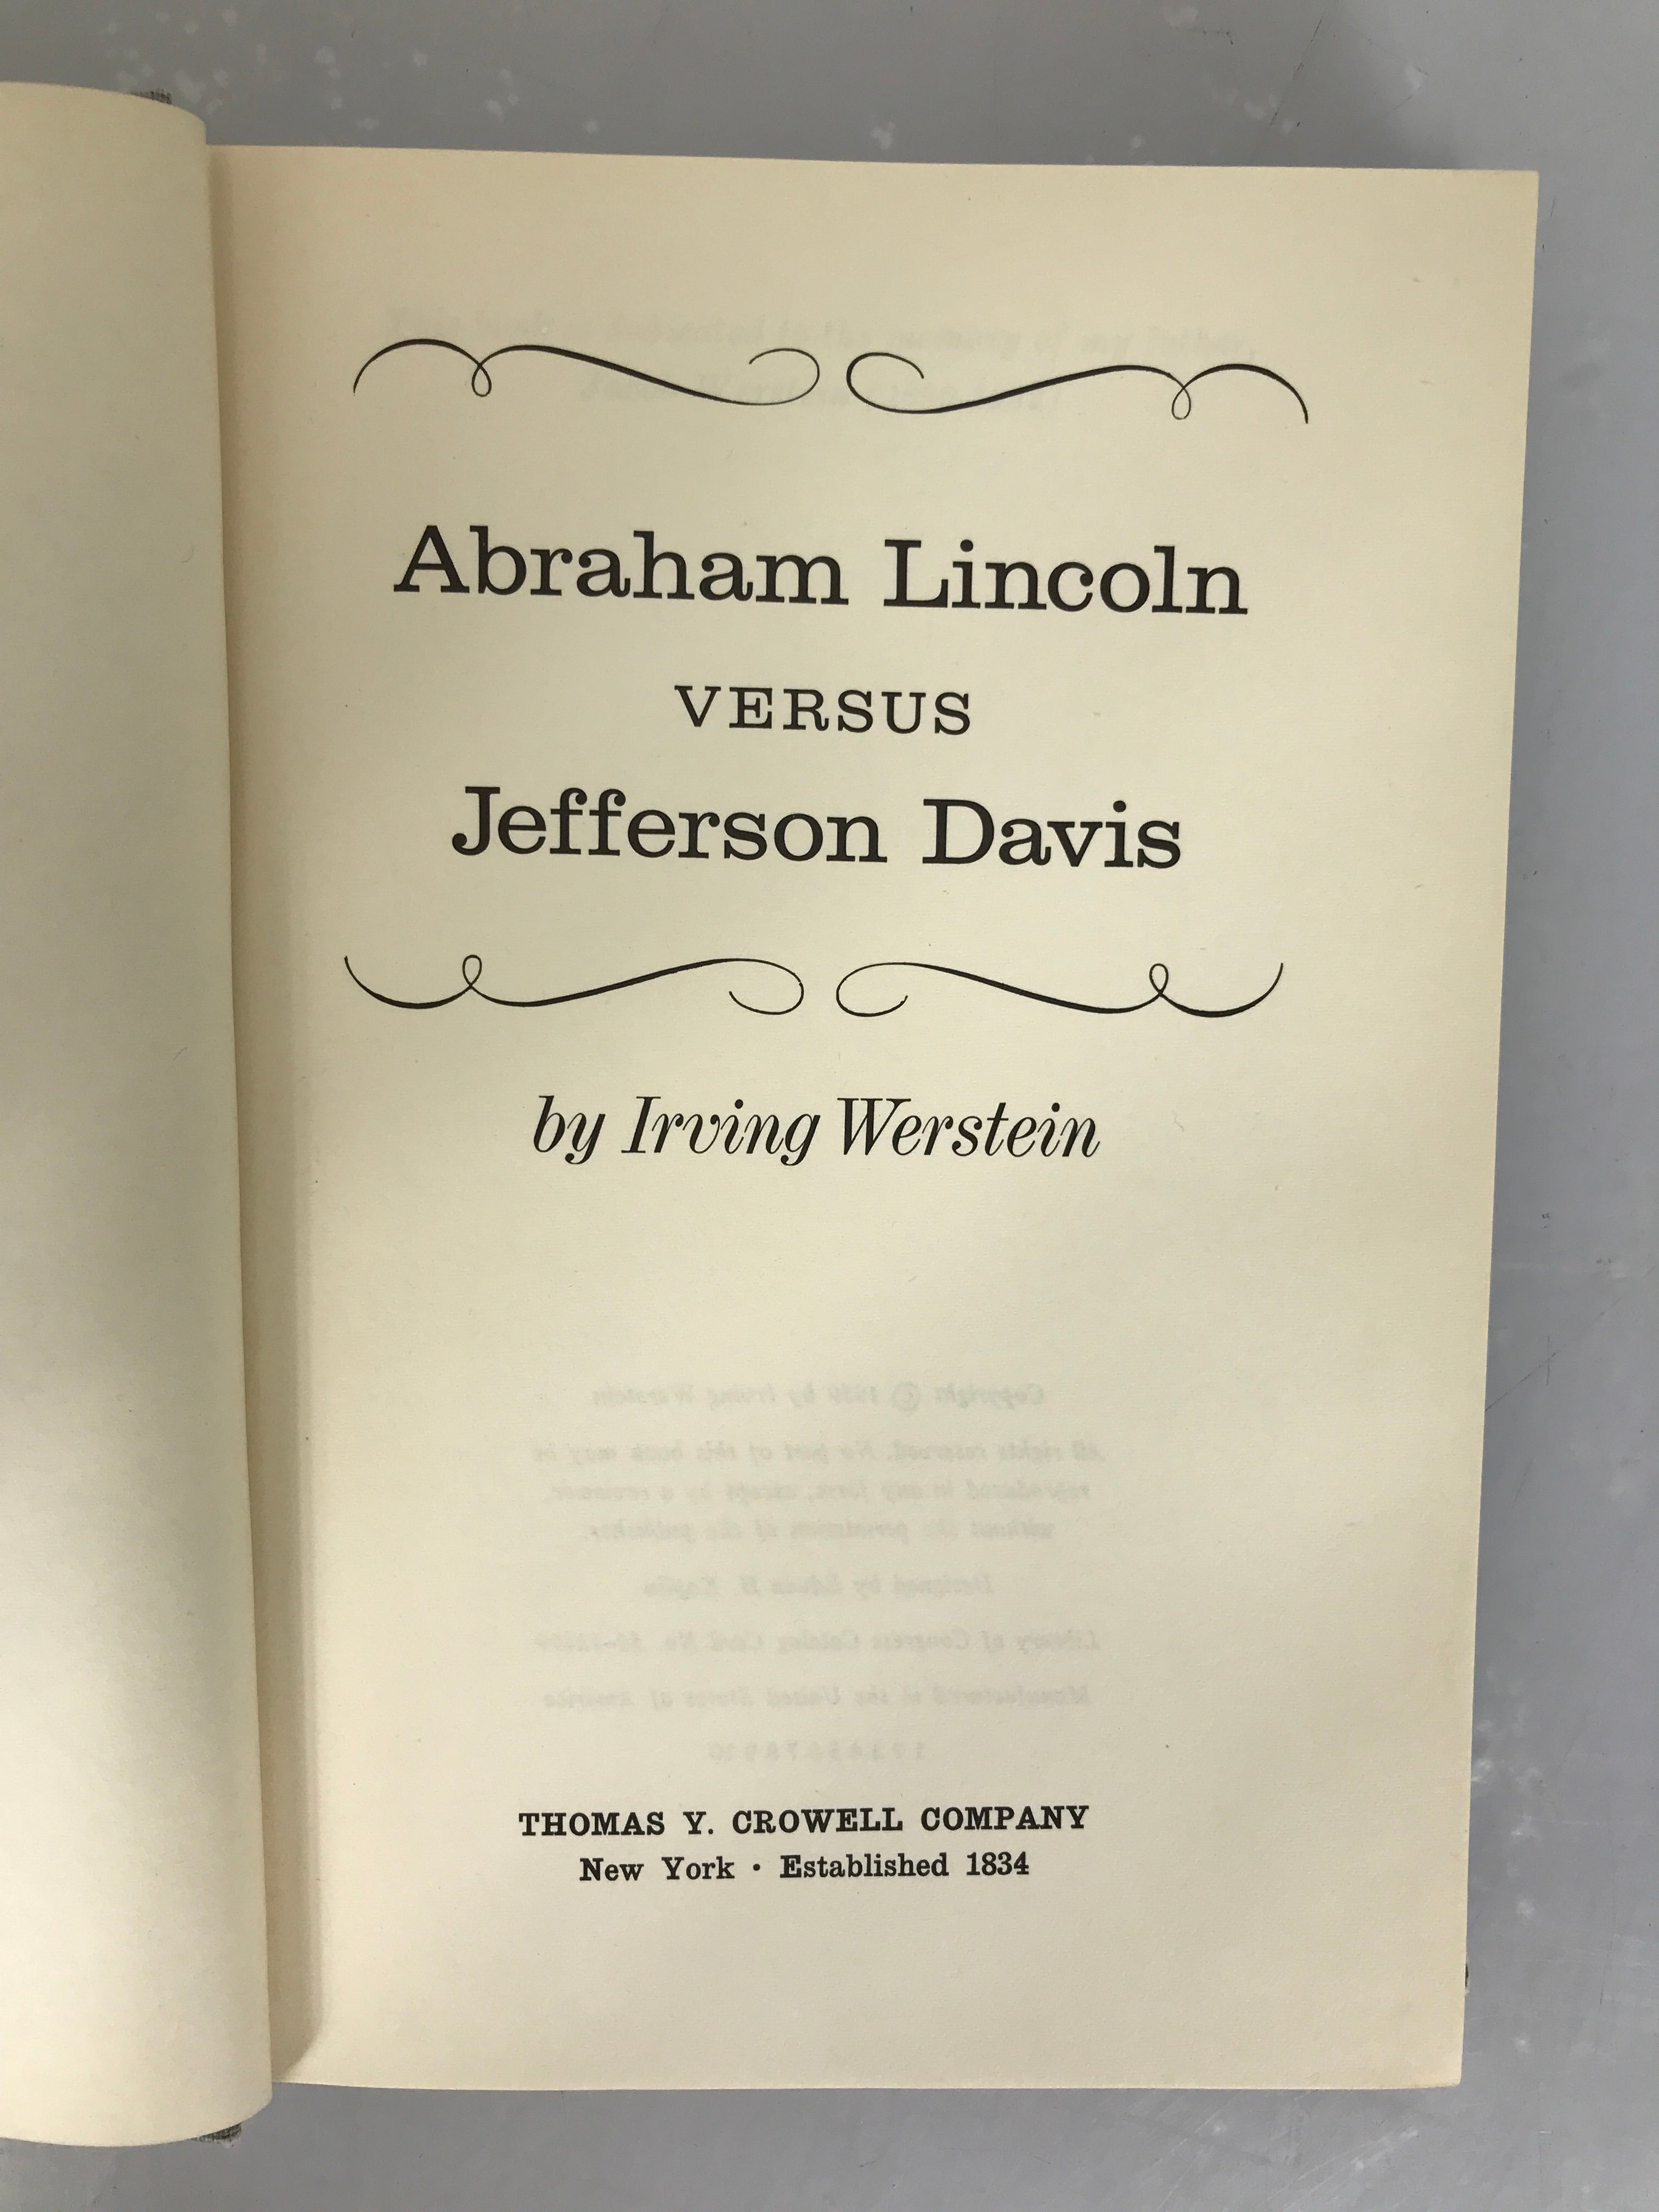 Lot of 3: Lincoln Versus Jefferson Davis (1959), To Appomattox (1959), and Abe Lincoln An Anthology (1953) All First Editions HC DJ